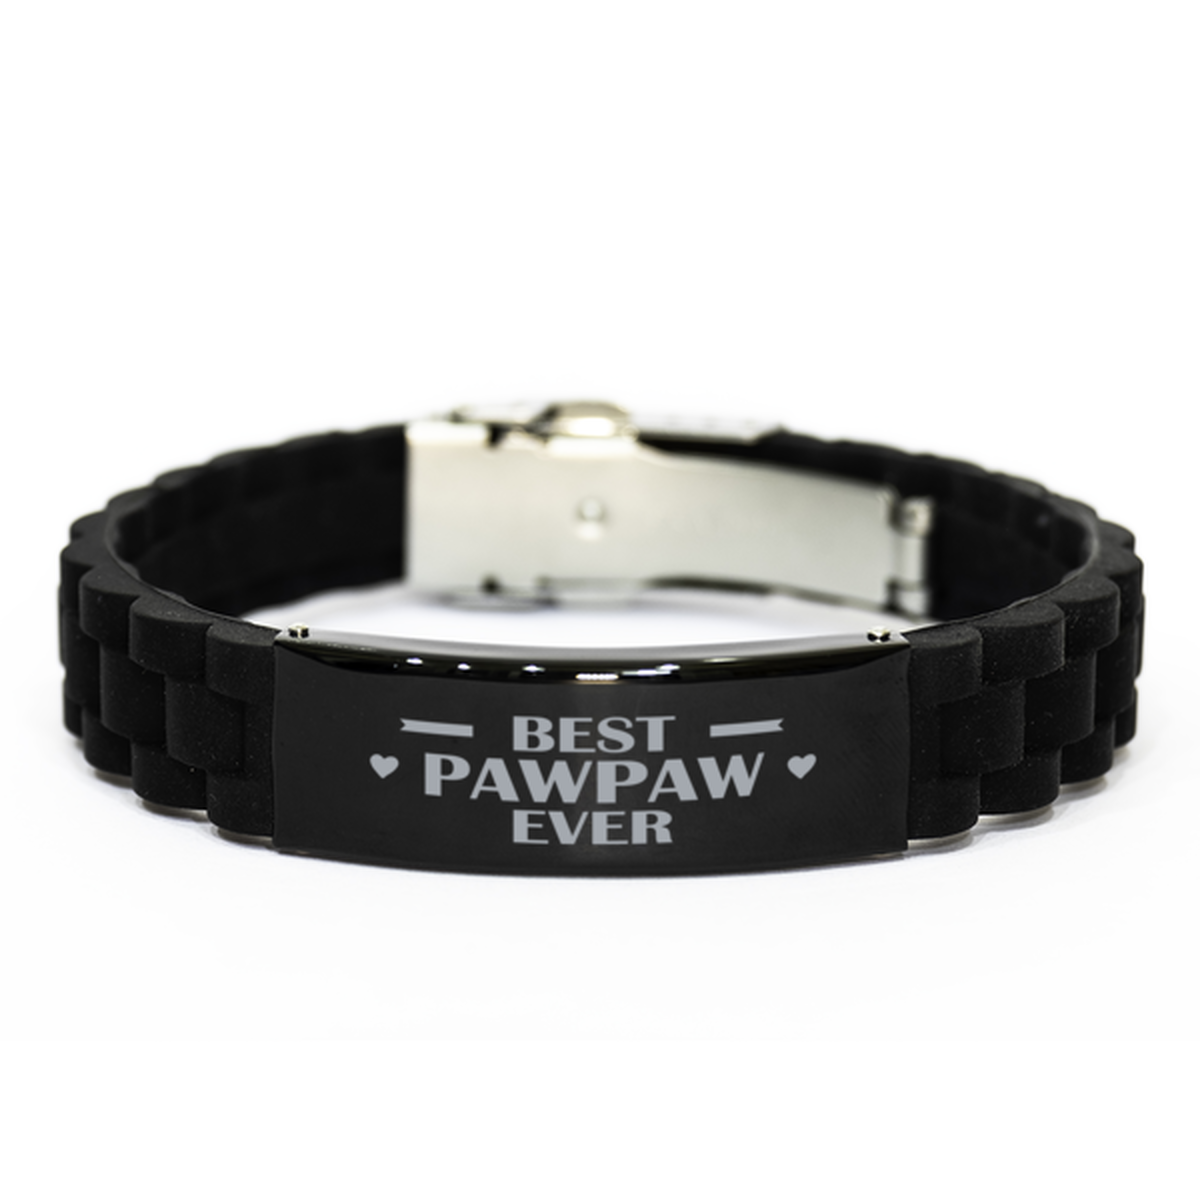 Best Pawpaw Ever Pawpaw Gifts, Funny Black Engraved Bracelet For Pawpaw, Family Gifts For Men